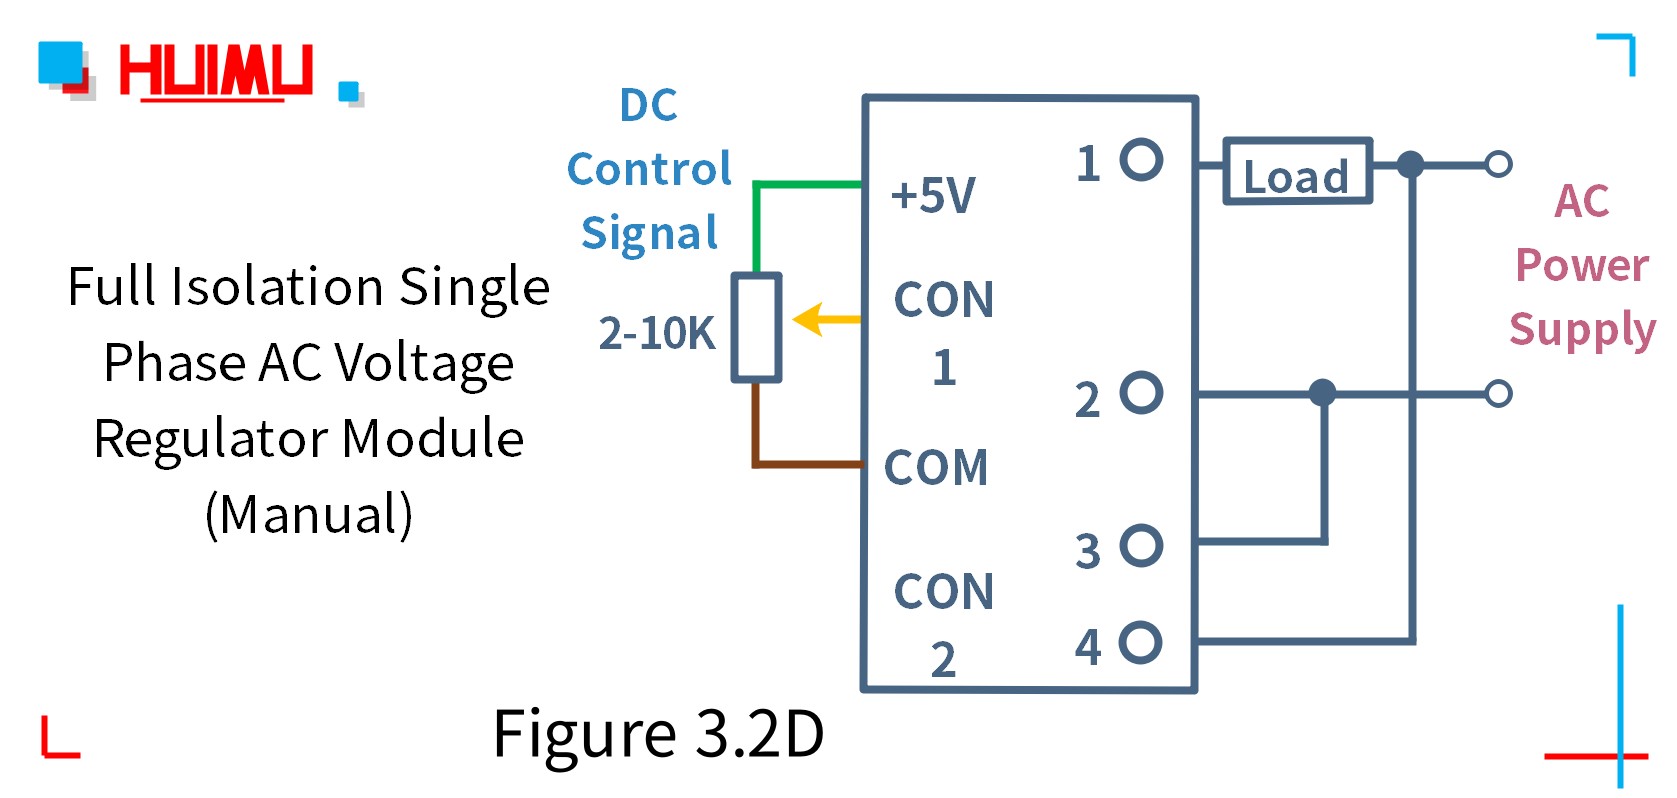 How to wire MGR mager MGR-DTY2240EG full isolation single phase AC voltage regulator? Manual type AC voltage regulator module circuit diagram, E, F, H types can be controlled by manual, and G type cannot. More detail via www.@huimultd.com